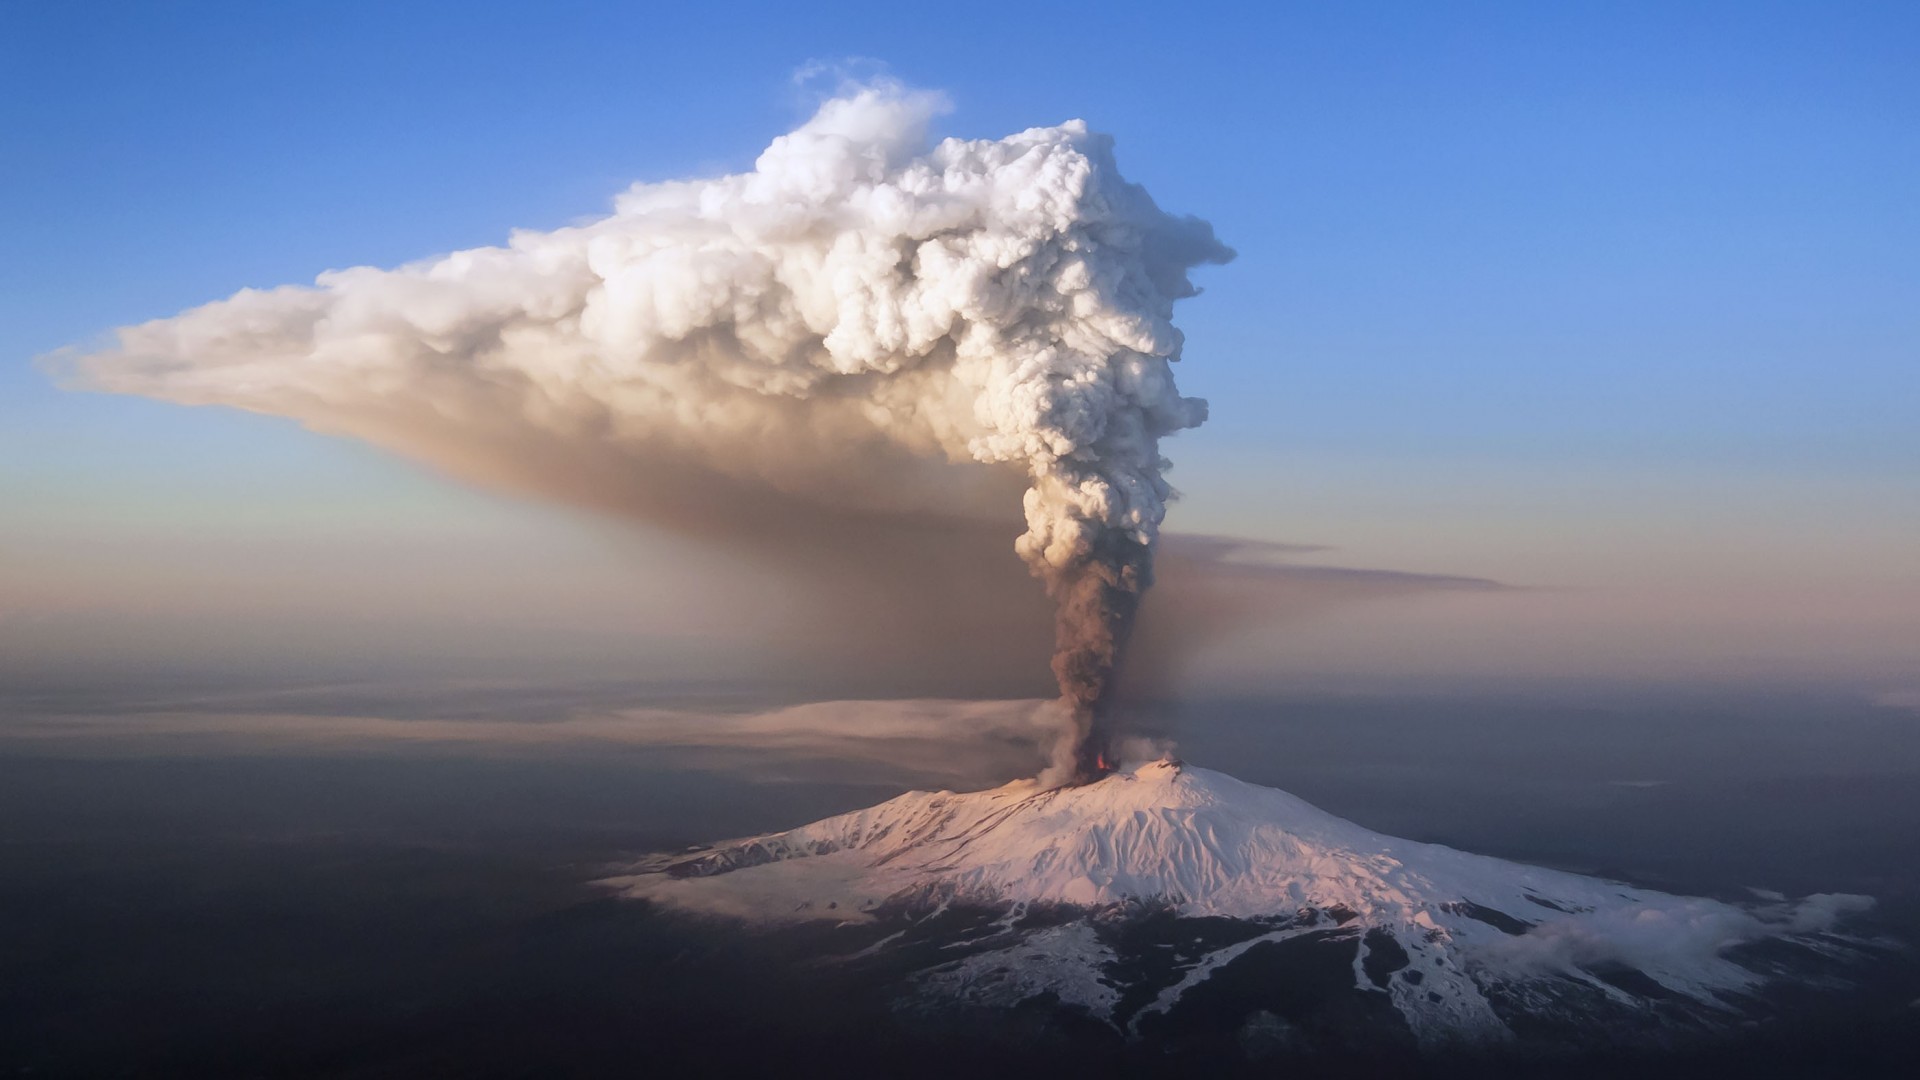 General 1920x1080 volcano smoke sky snow forest snowy peak nature landscape mountains Sicily Italy eruption winter fire lava clouds clear sky aerial view Mount Etna volcanic eruption